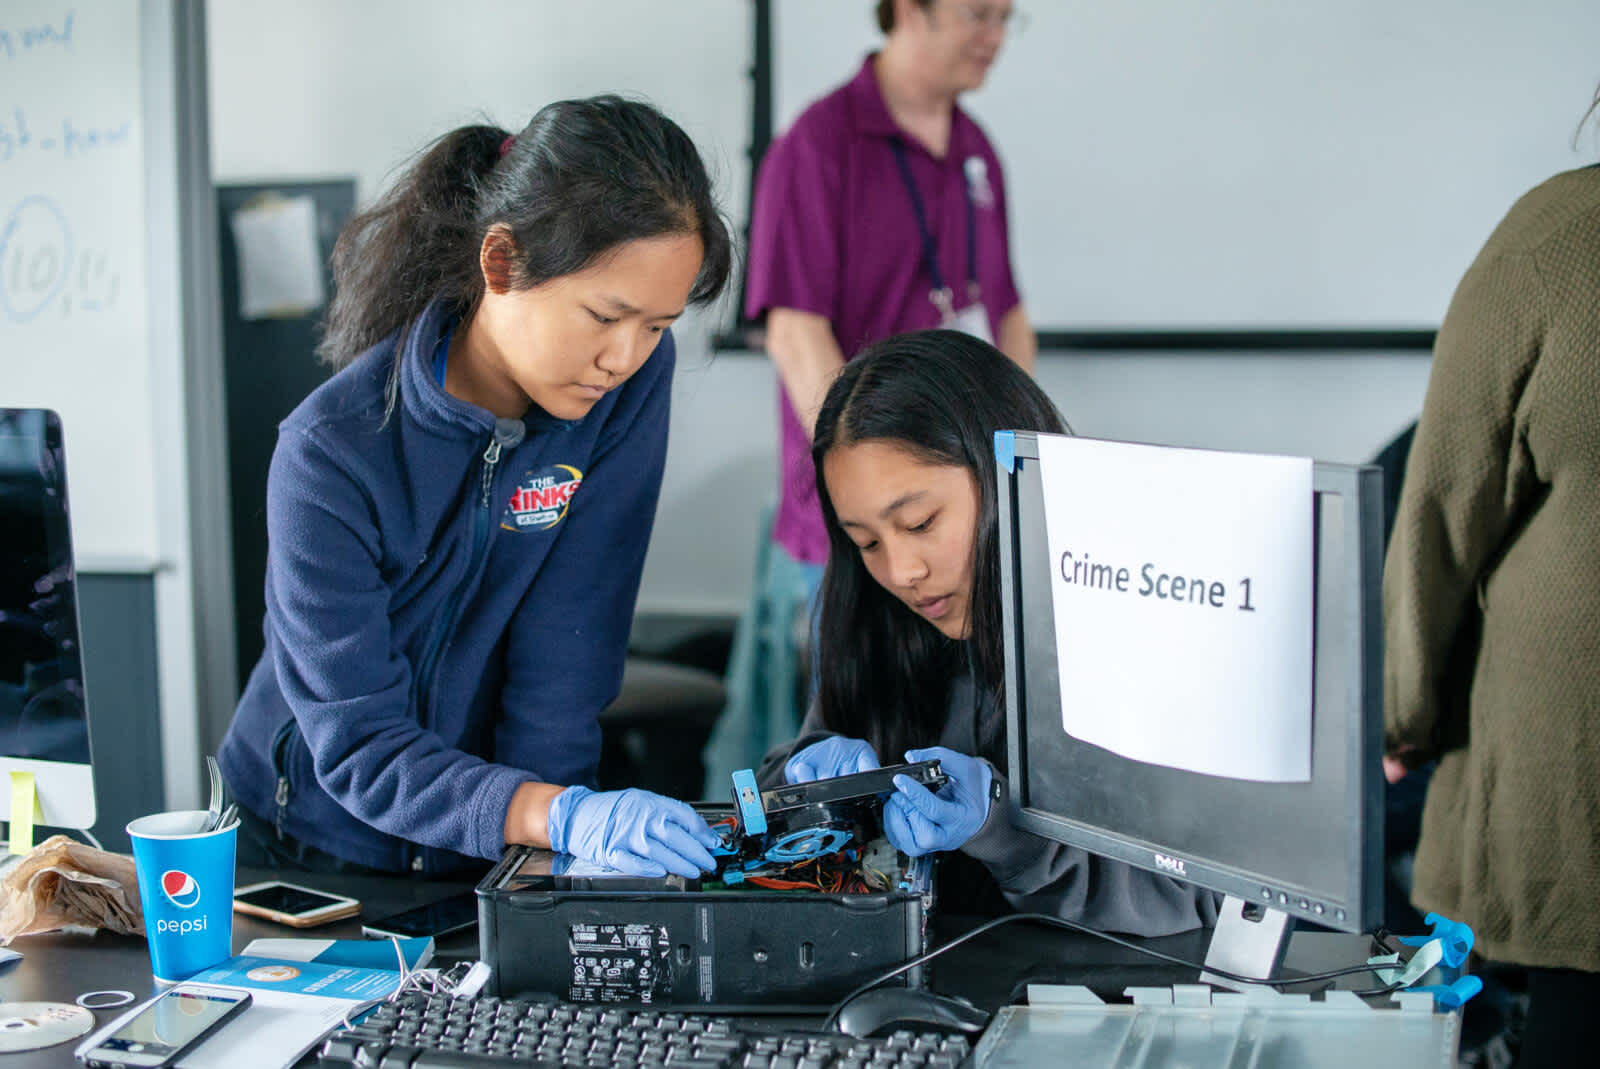 Two students examining the inside of a computer next to a monitor with a sign that says, "Crime Scene 1"